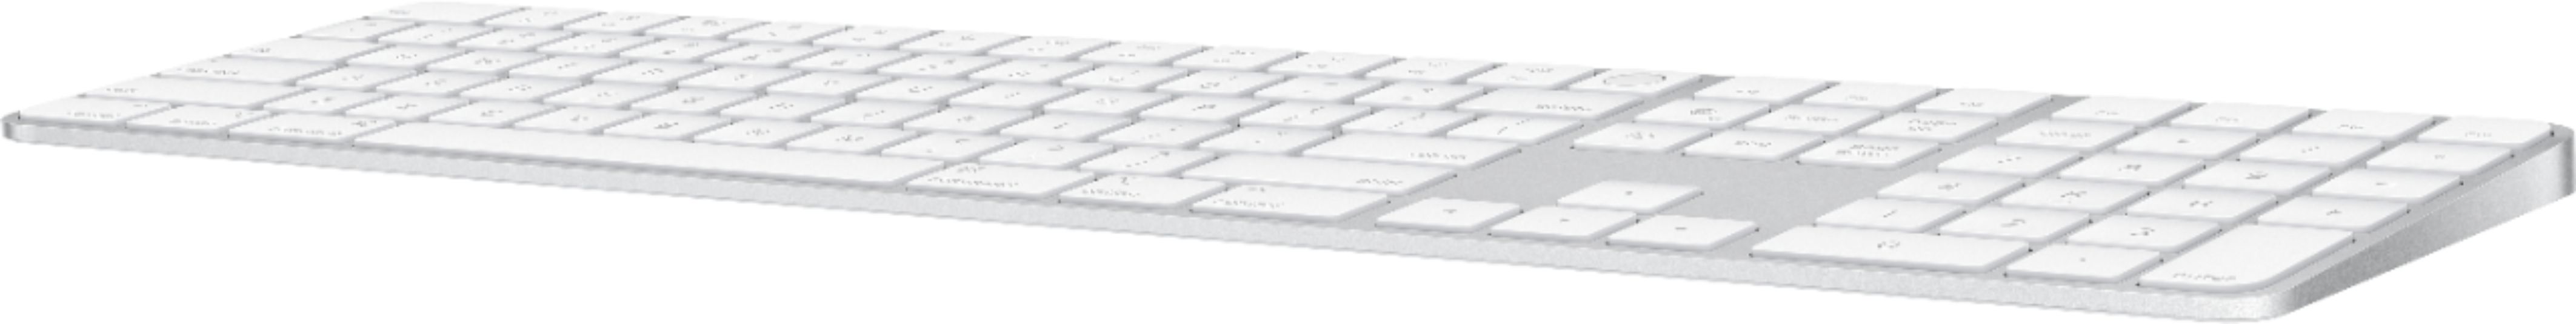 PC/タブレット PC周辺機器 Magic Keyboard with Touch ID and Numeric Keypad for Mac models 